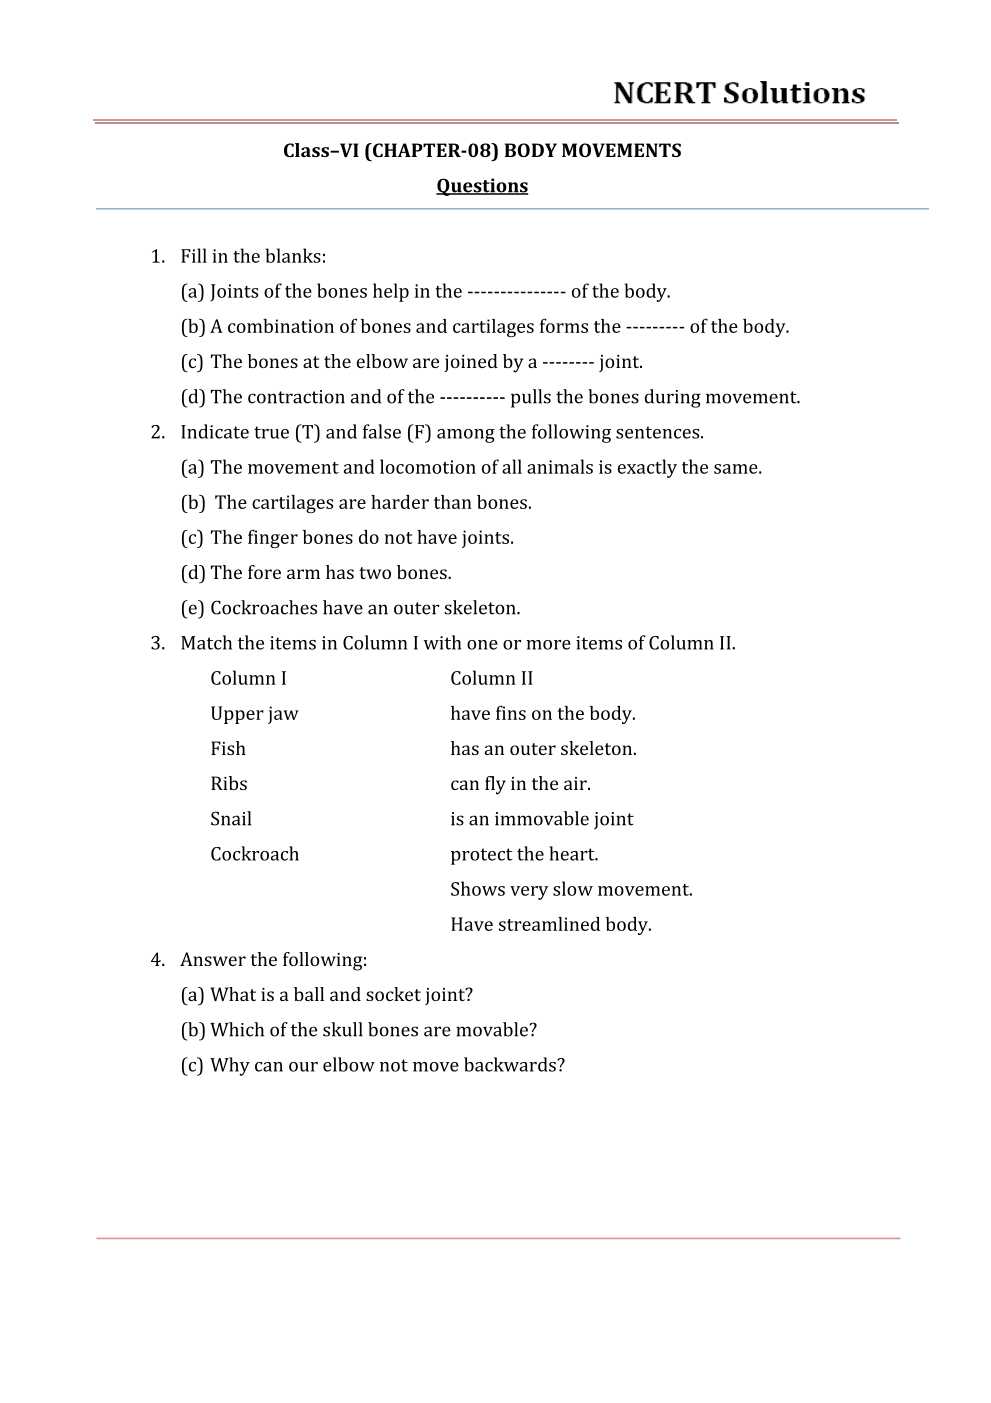 NCERT Solutions For Class 6 Science Chapter 8